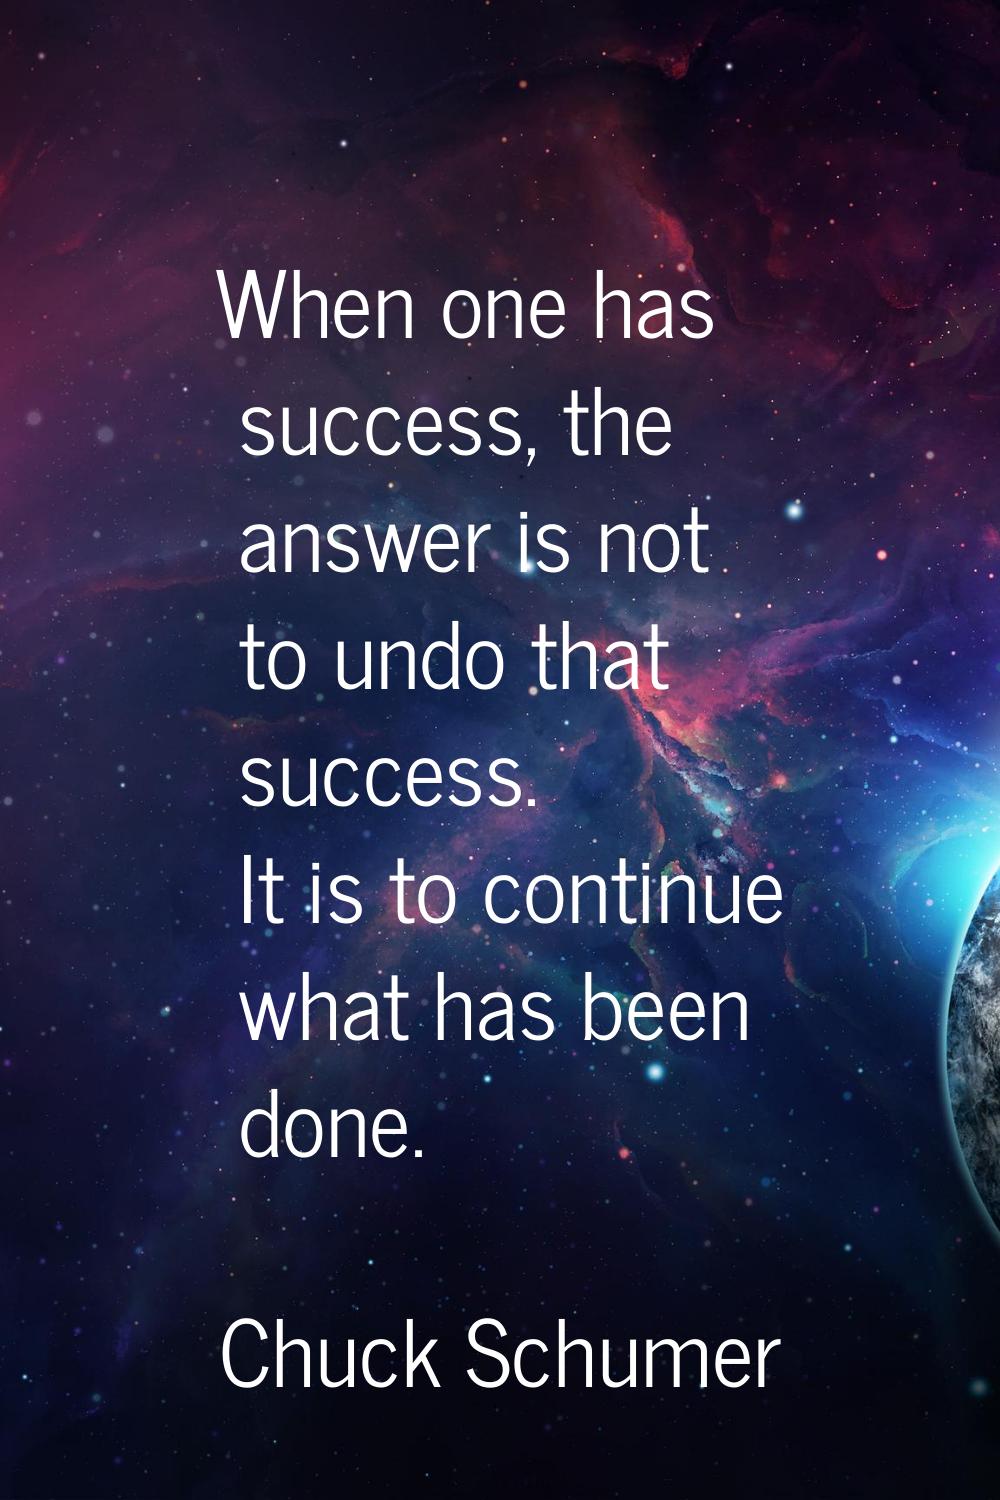 When one has success, the answer is not to undo that success. It is to continue what has been done.